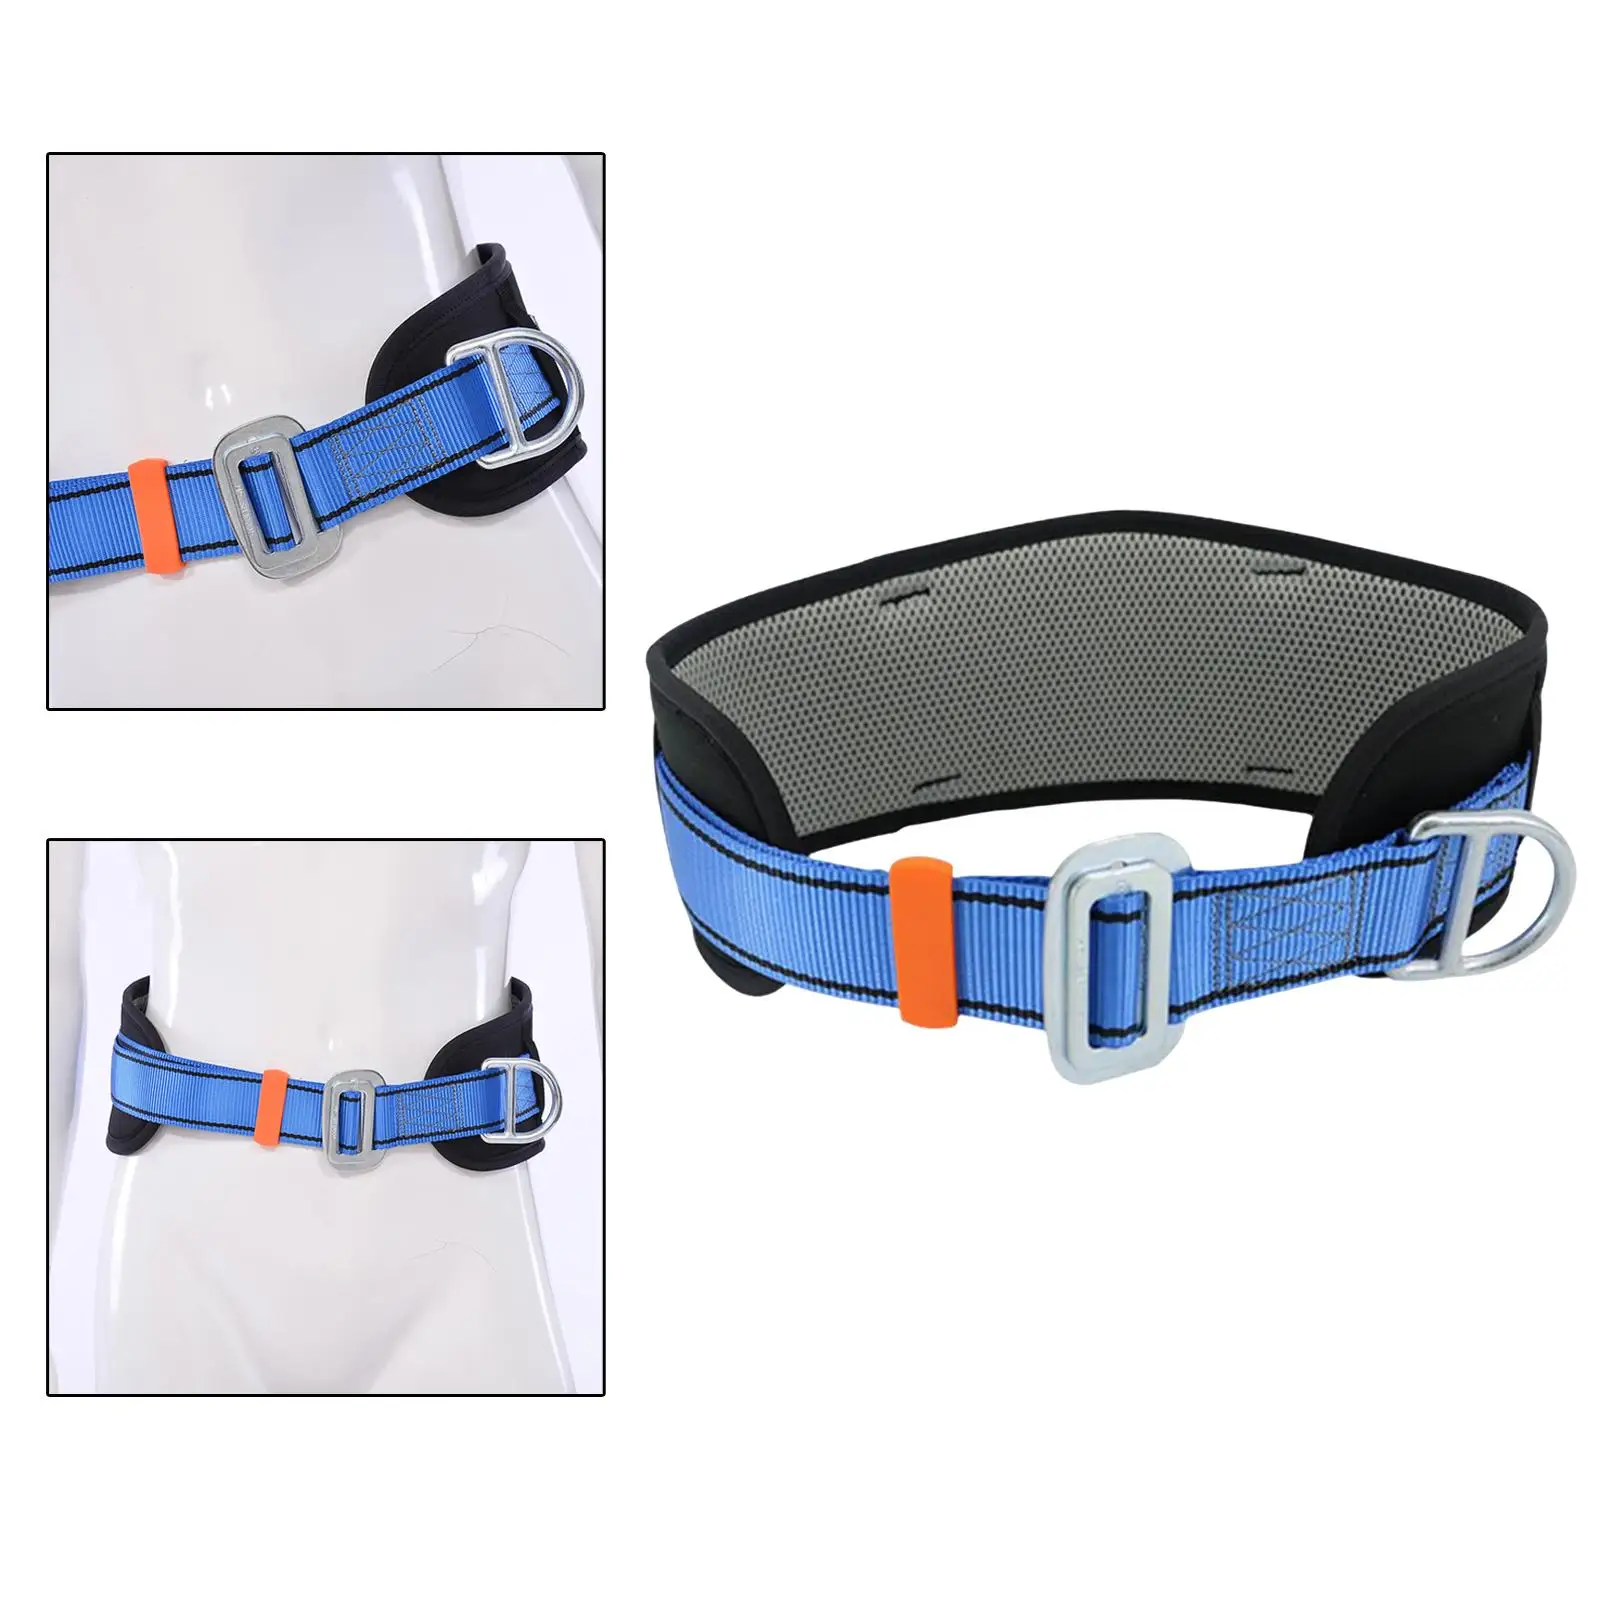 1 Piece Single Hanging Point Lanyard Portable Protective Personal Lightweight Safety Harness Belt for Roof Downhill Work